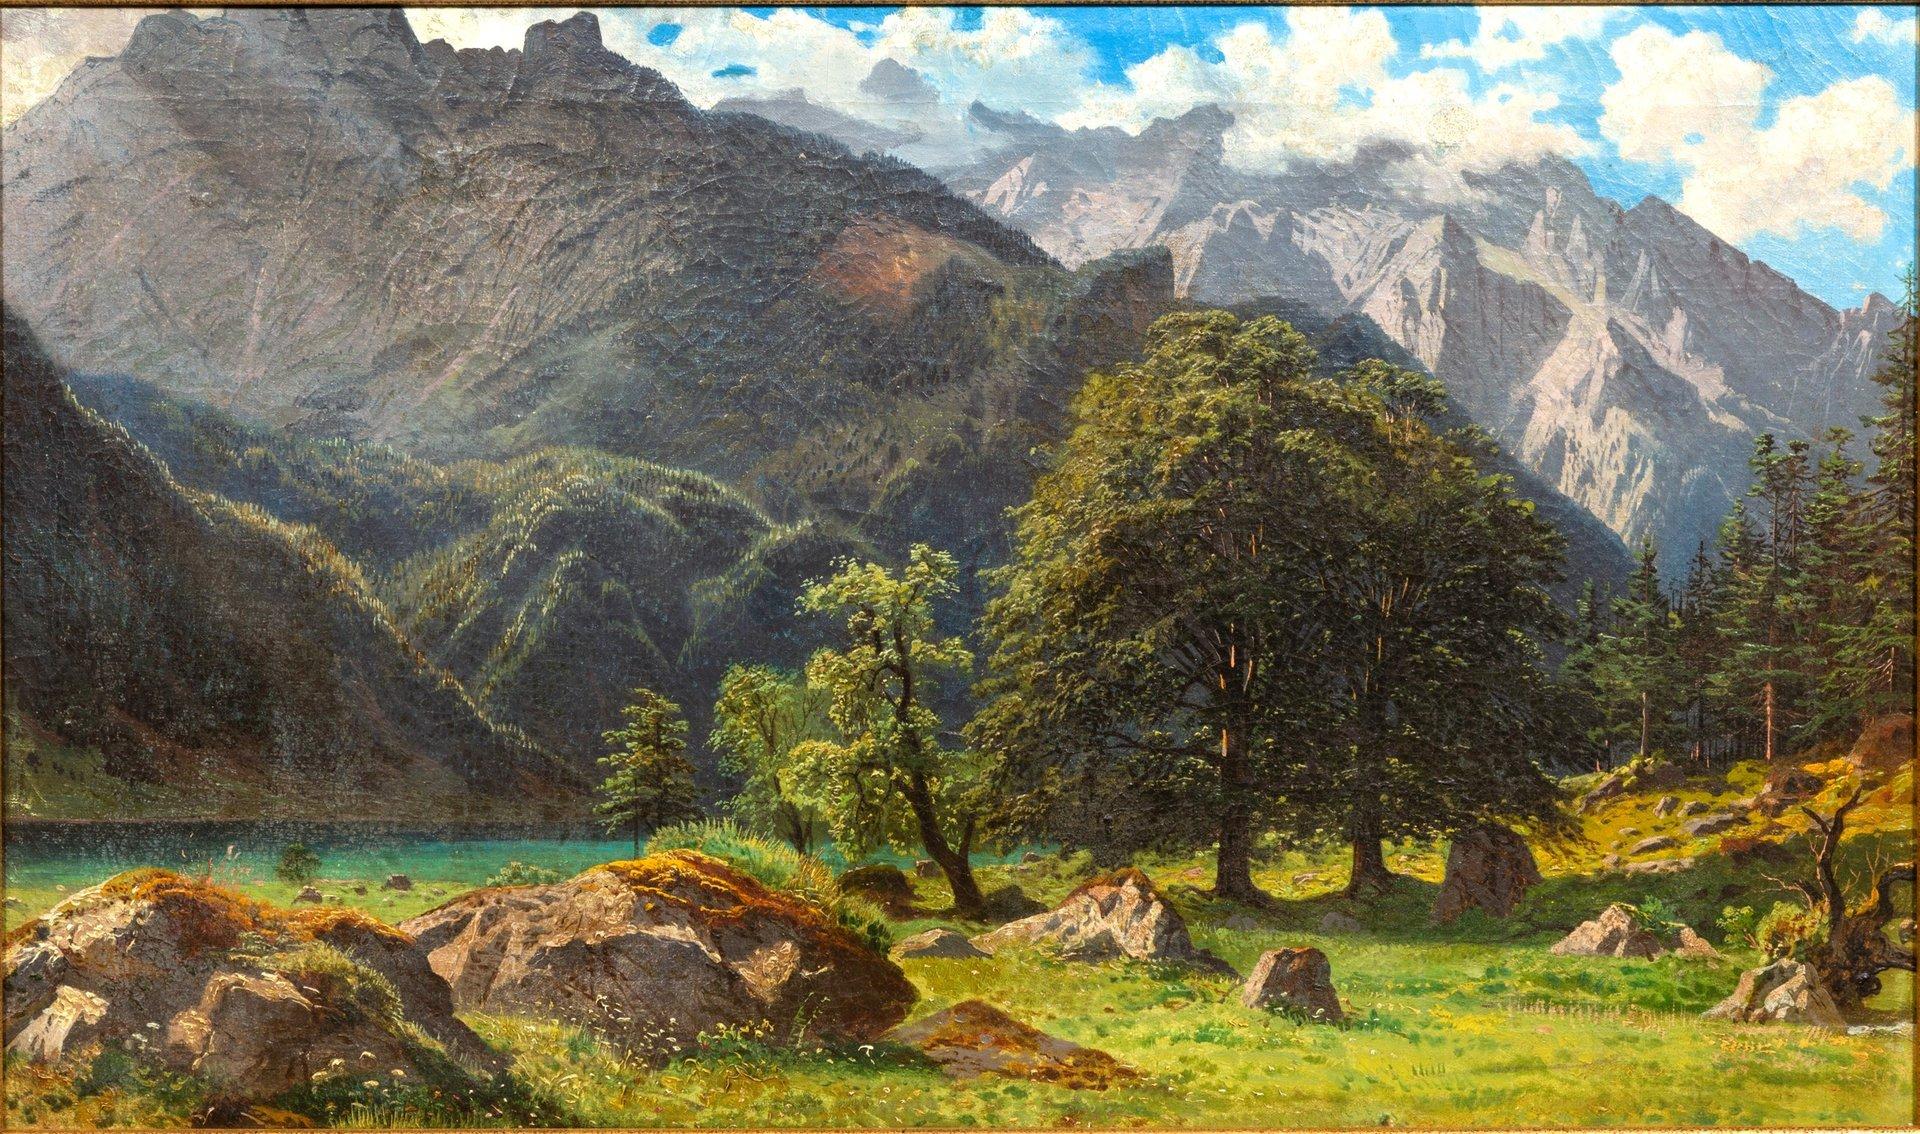 Obersee by François Roffiaen (1820-1898) Oil on canvas For Sale 11